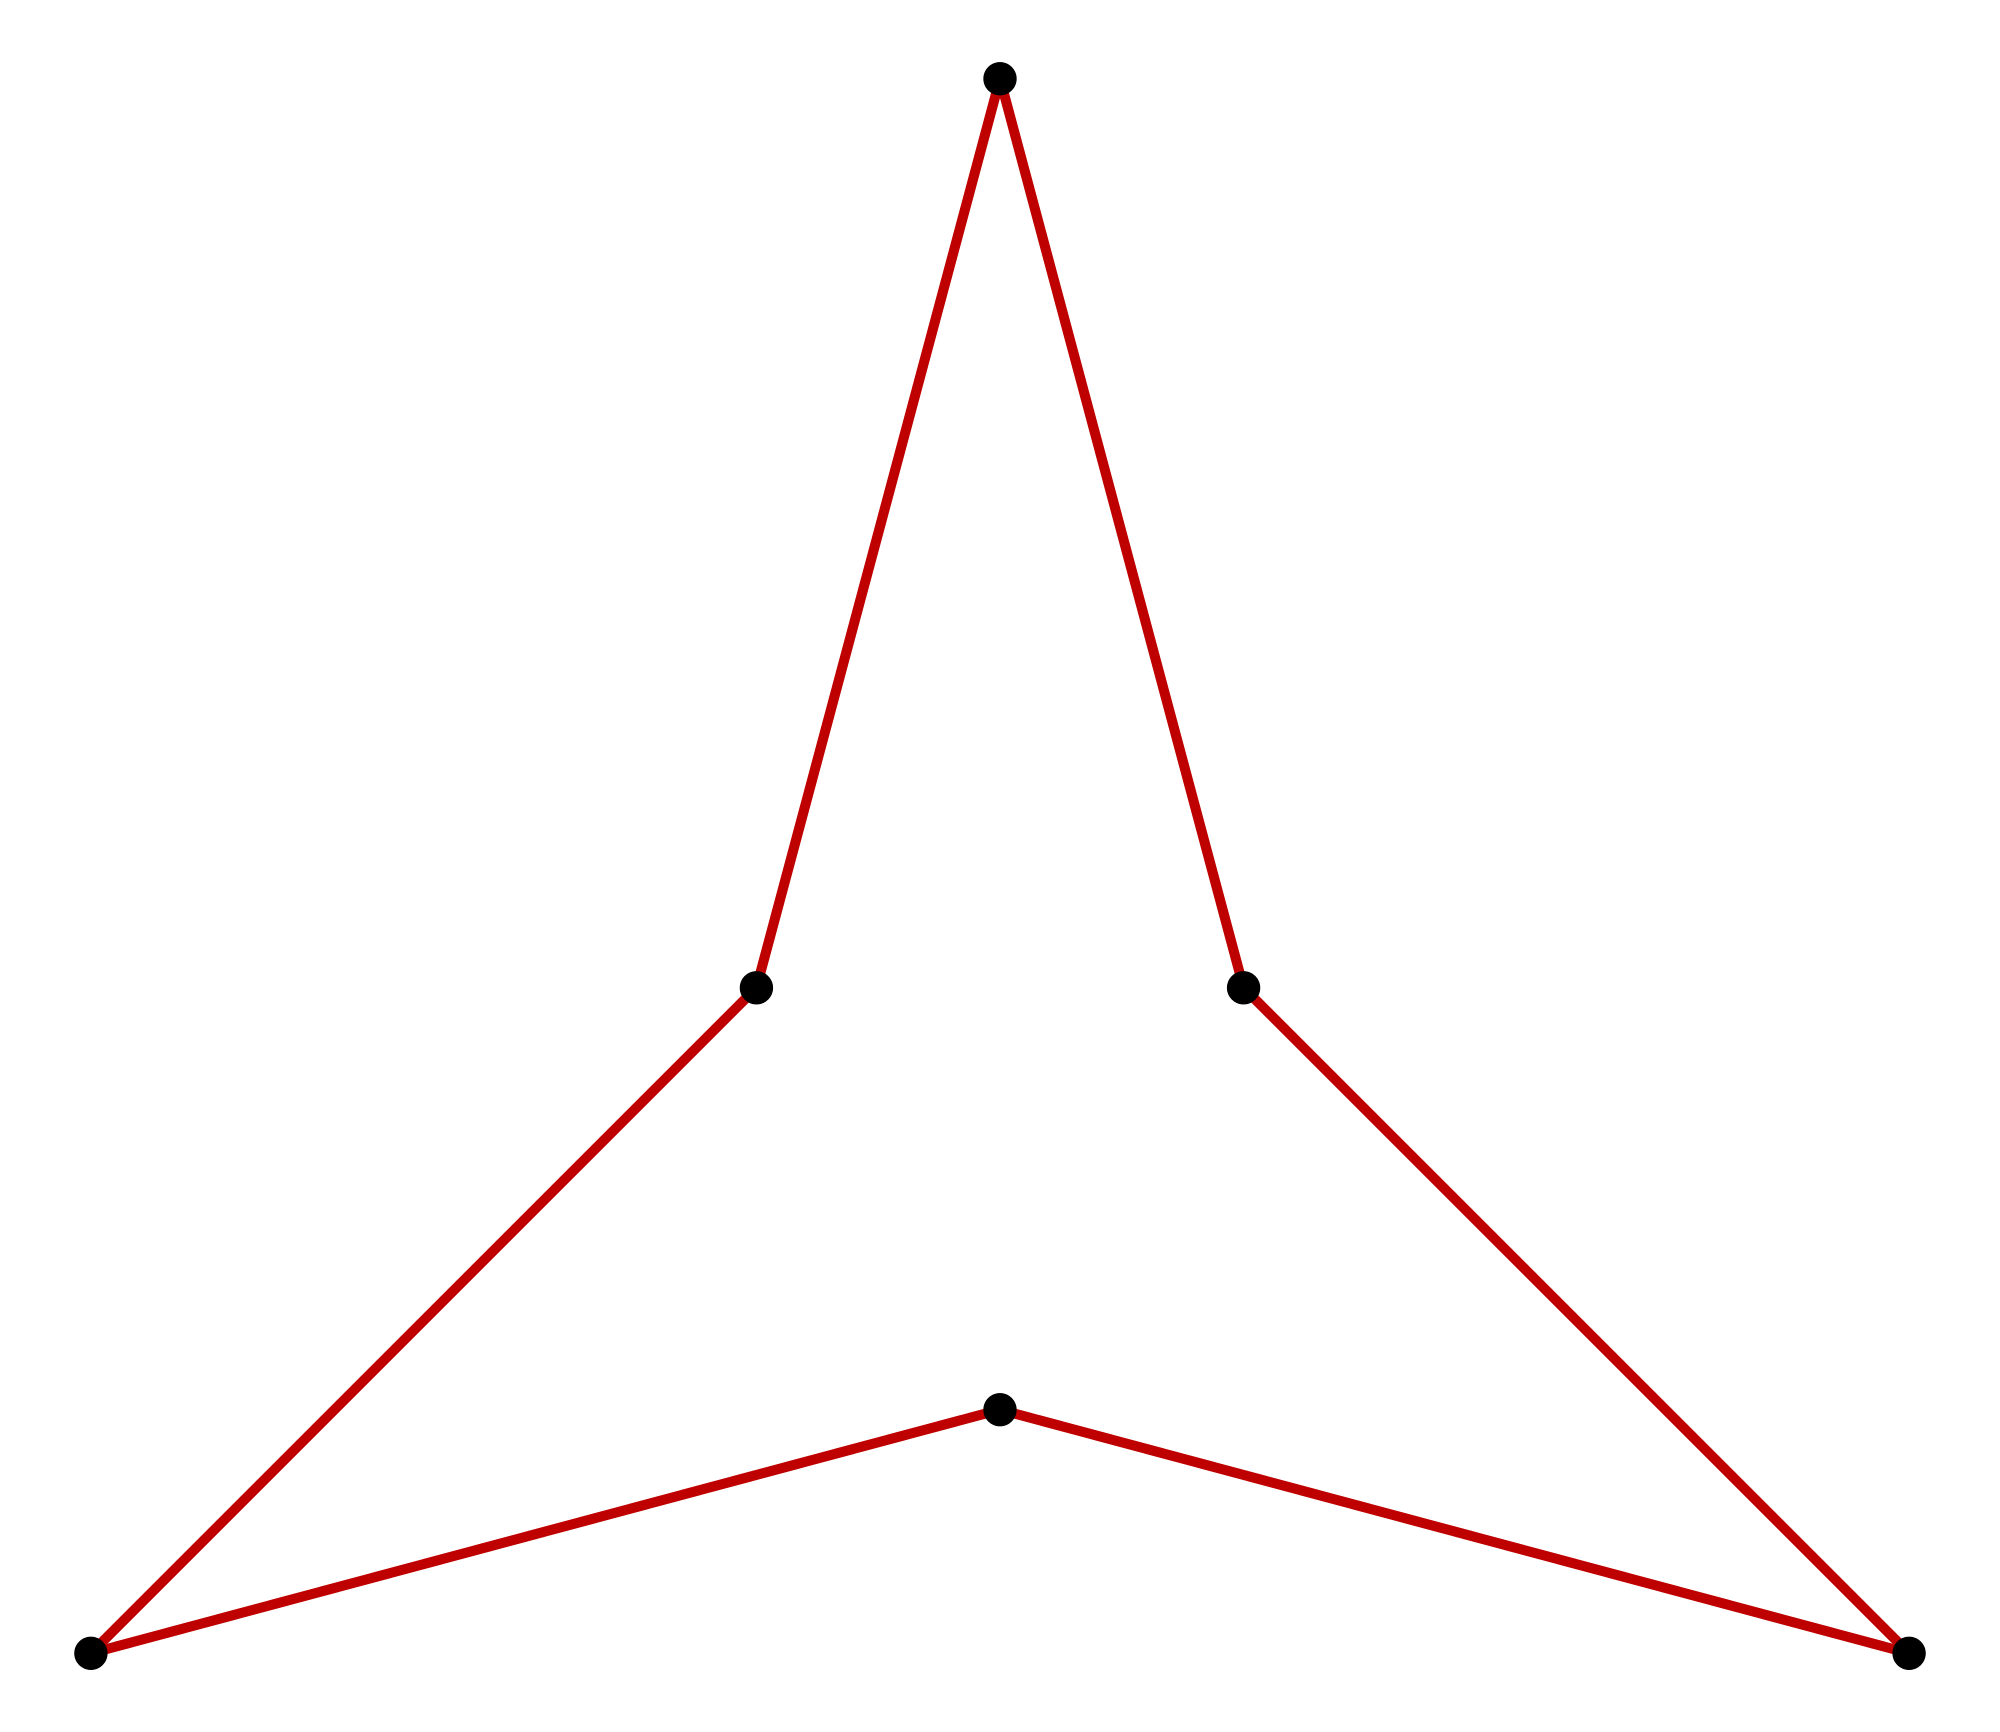 Red Triangle Star Logo - File:Isotoxal star triangle 12-5.svg - Wikimedia Commons